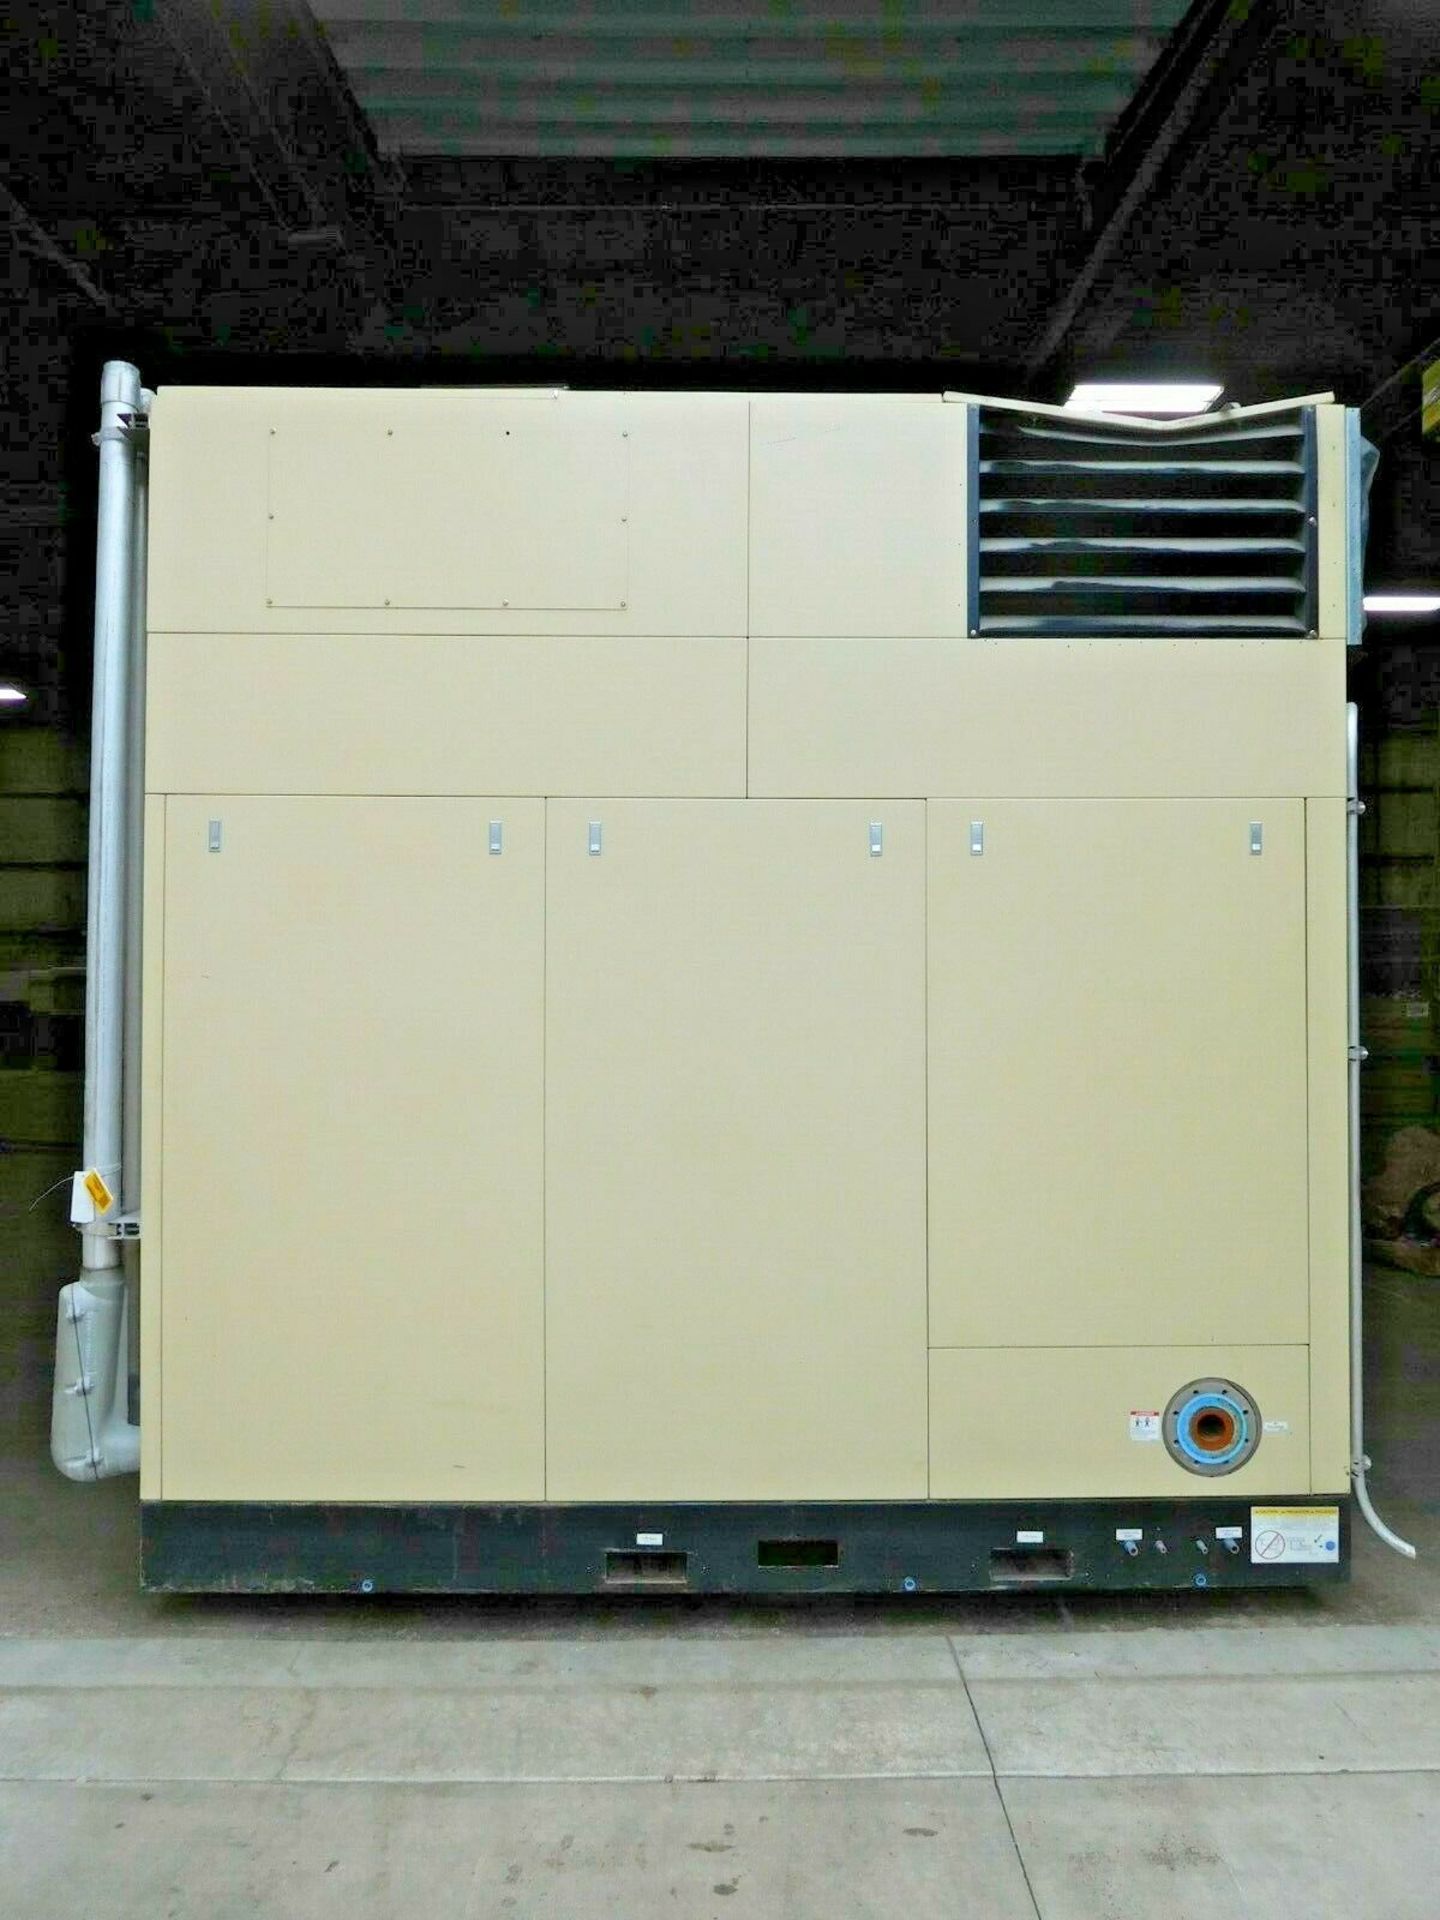 Ingersoll Rand H300 Rotary Screw Air Compressor. 1264 ACFM. 350 HP. - Image 5 of 7